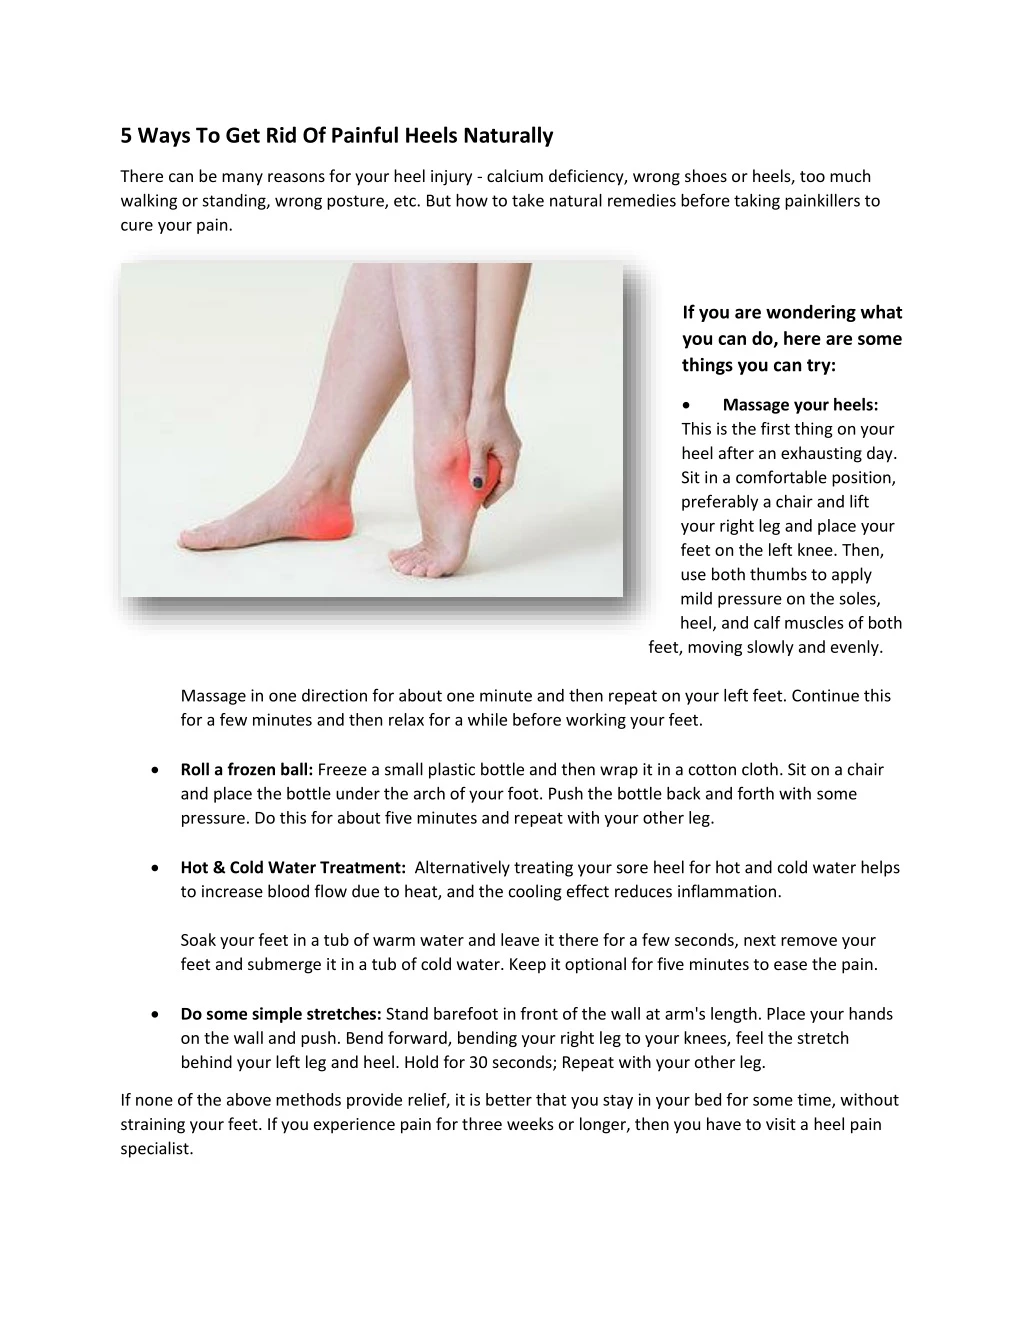 5 ways to get rid of painful heels naturally